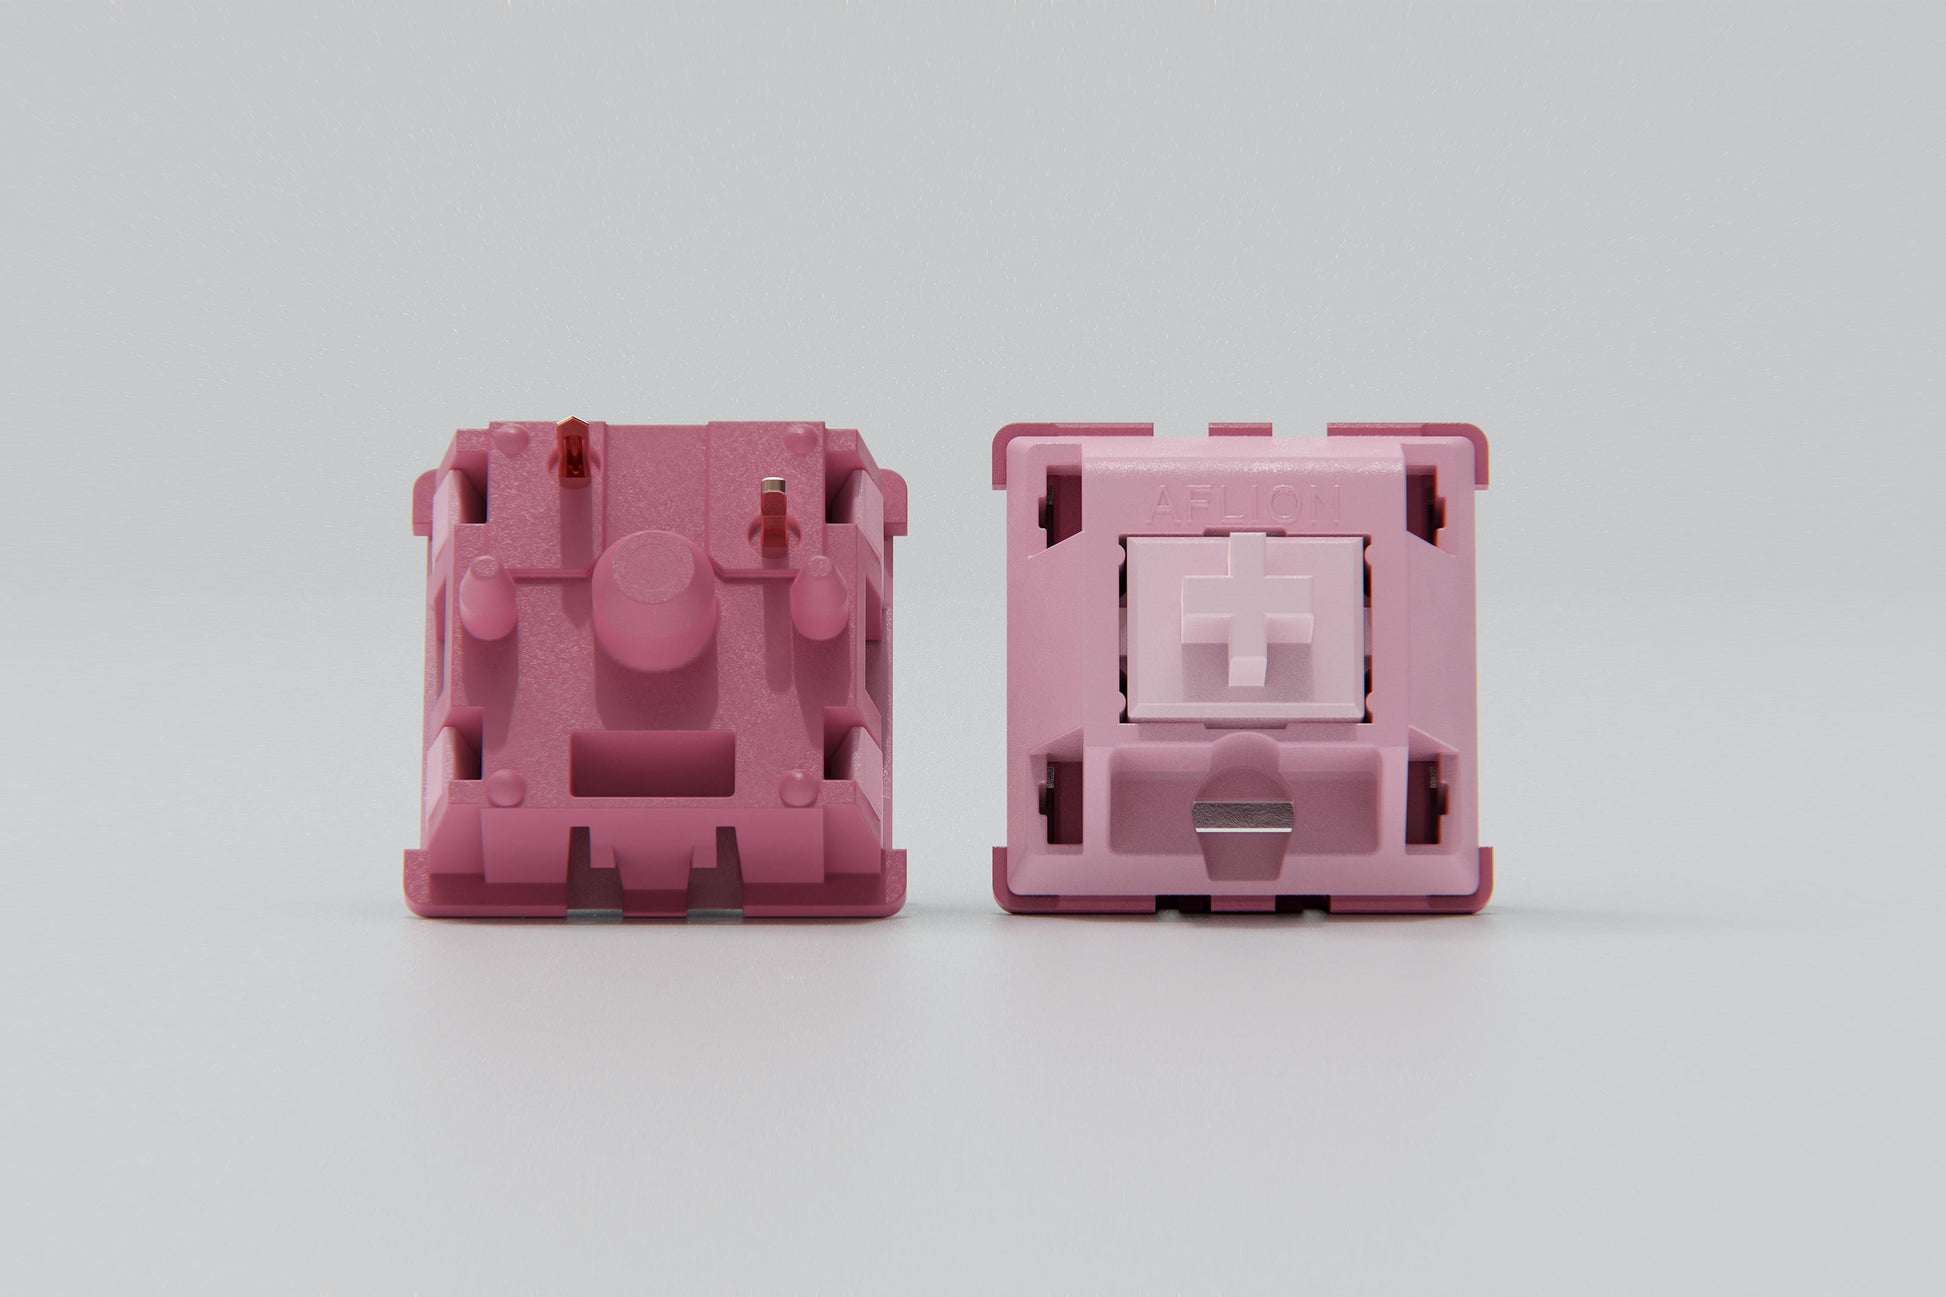 Close-up shot of the top and bottom view of Blush - Linear mechanical keyboard switches featuring dark and light pink housing and light pink stems